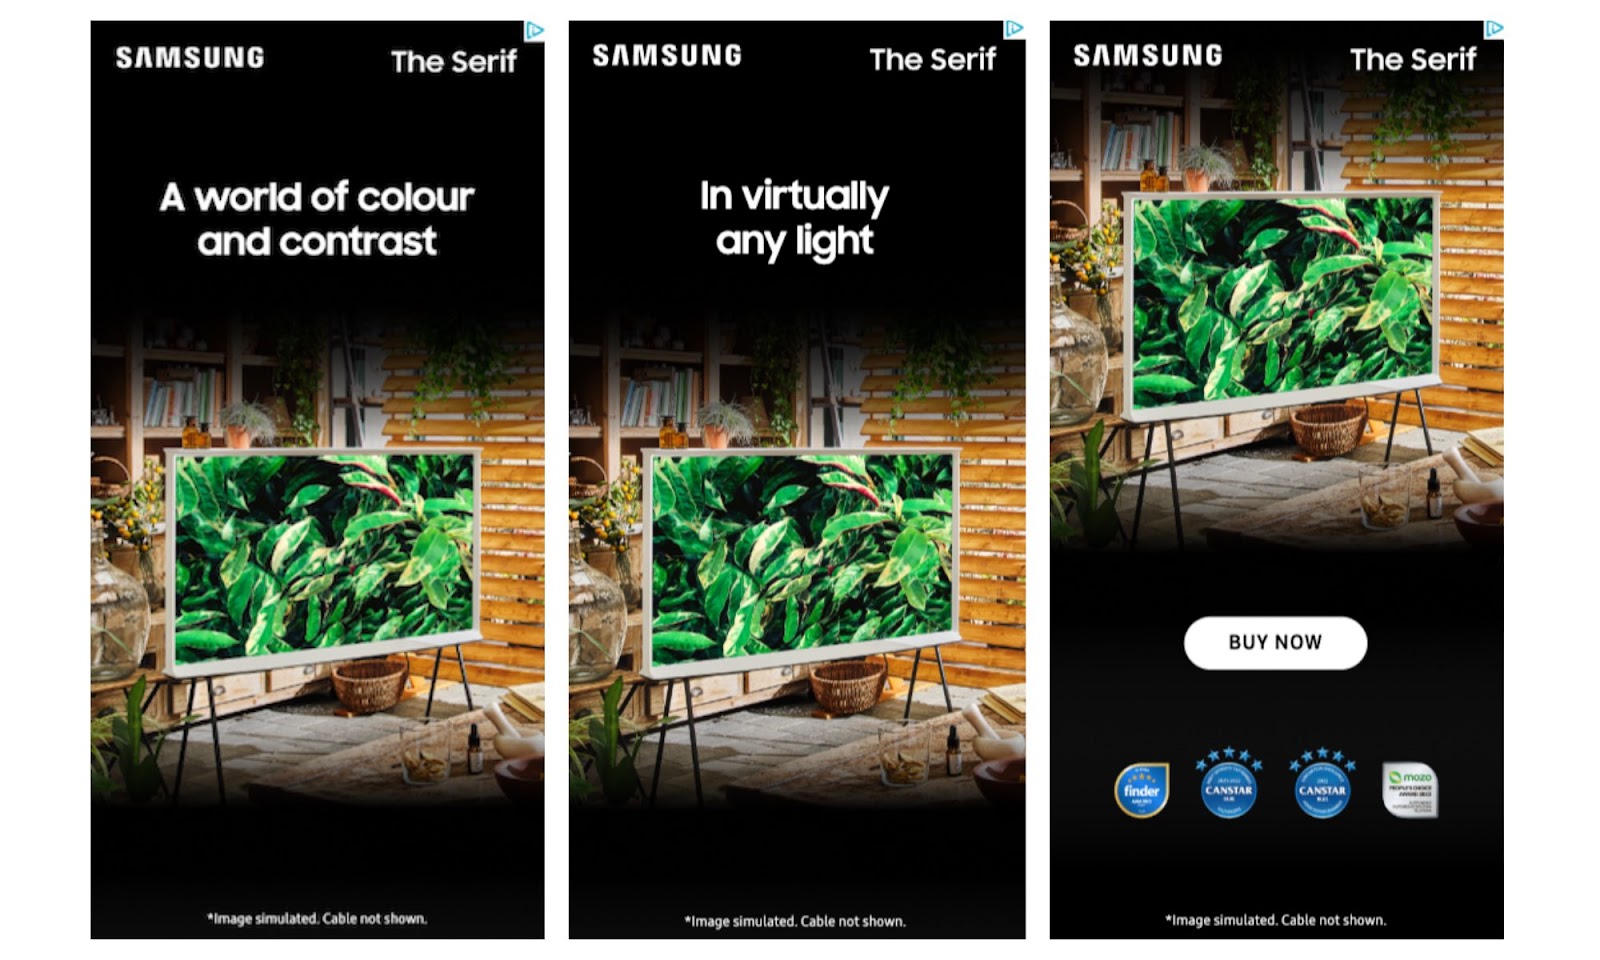 Samsung’s rich ad for The Serif TV